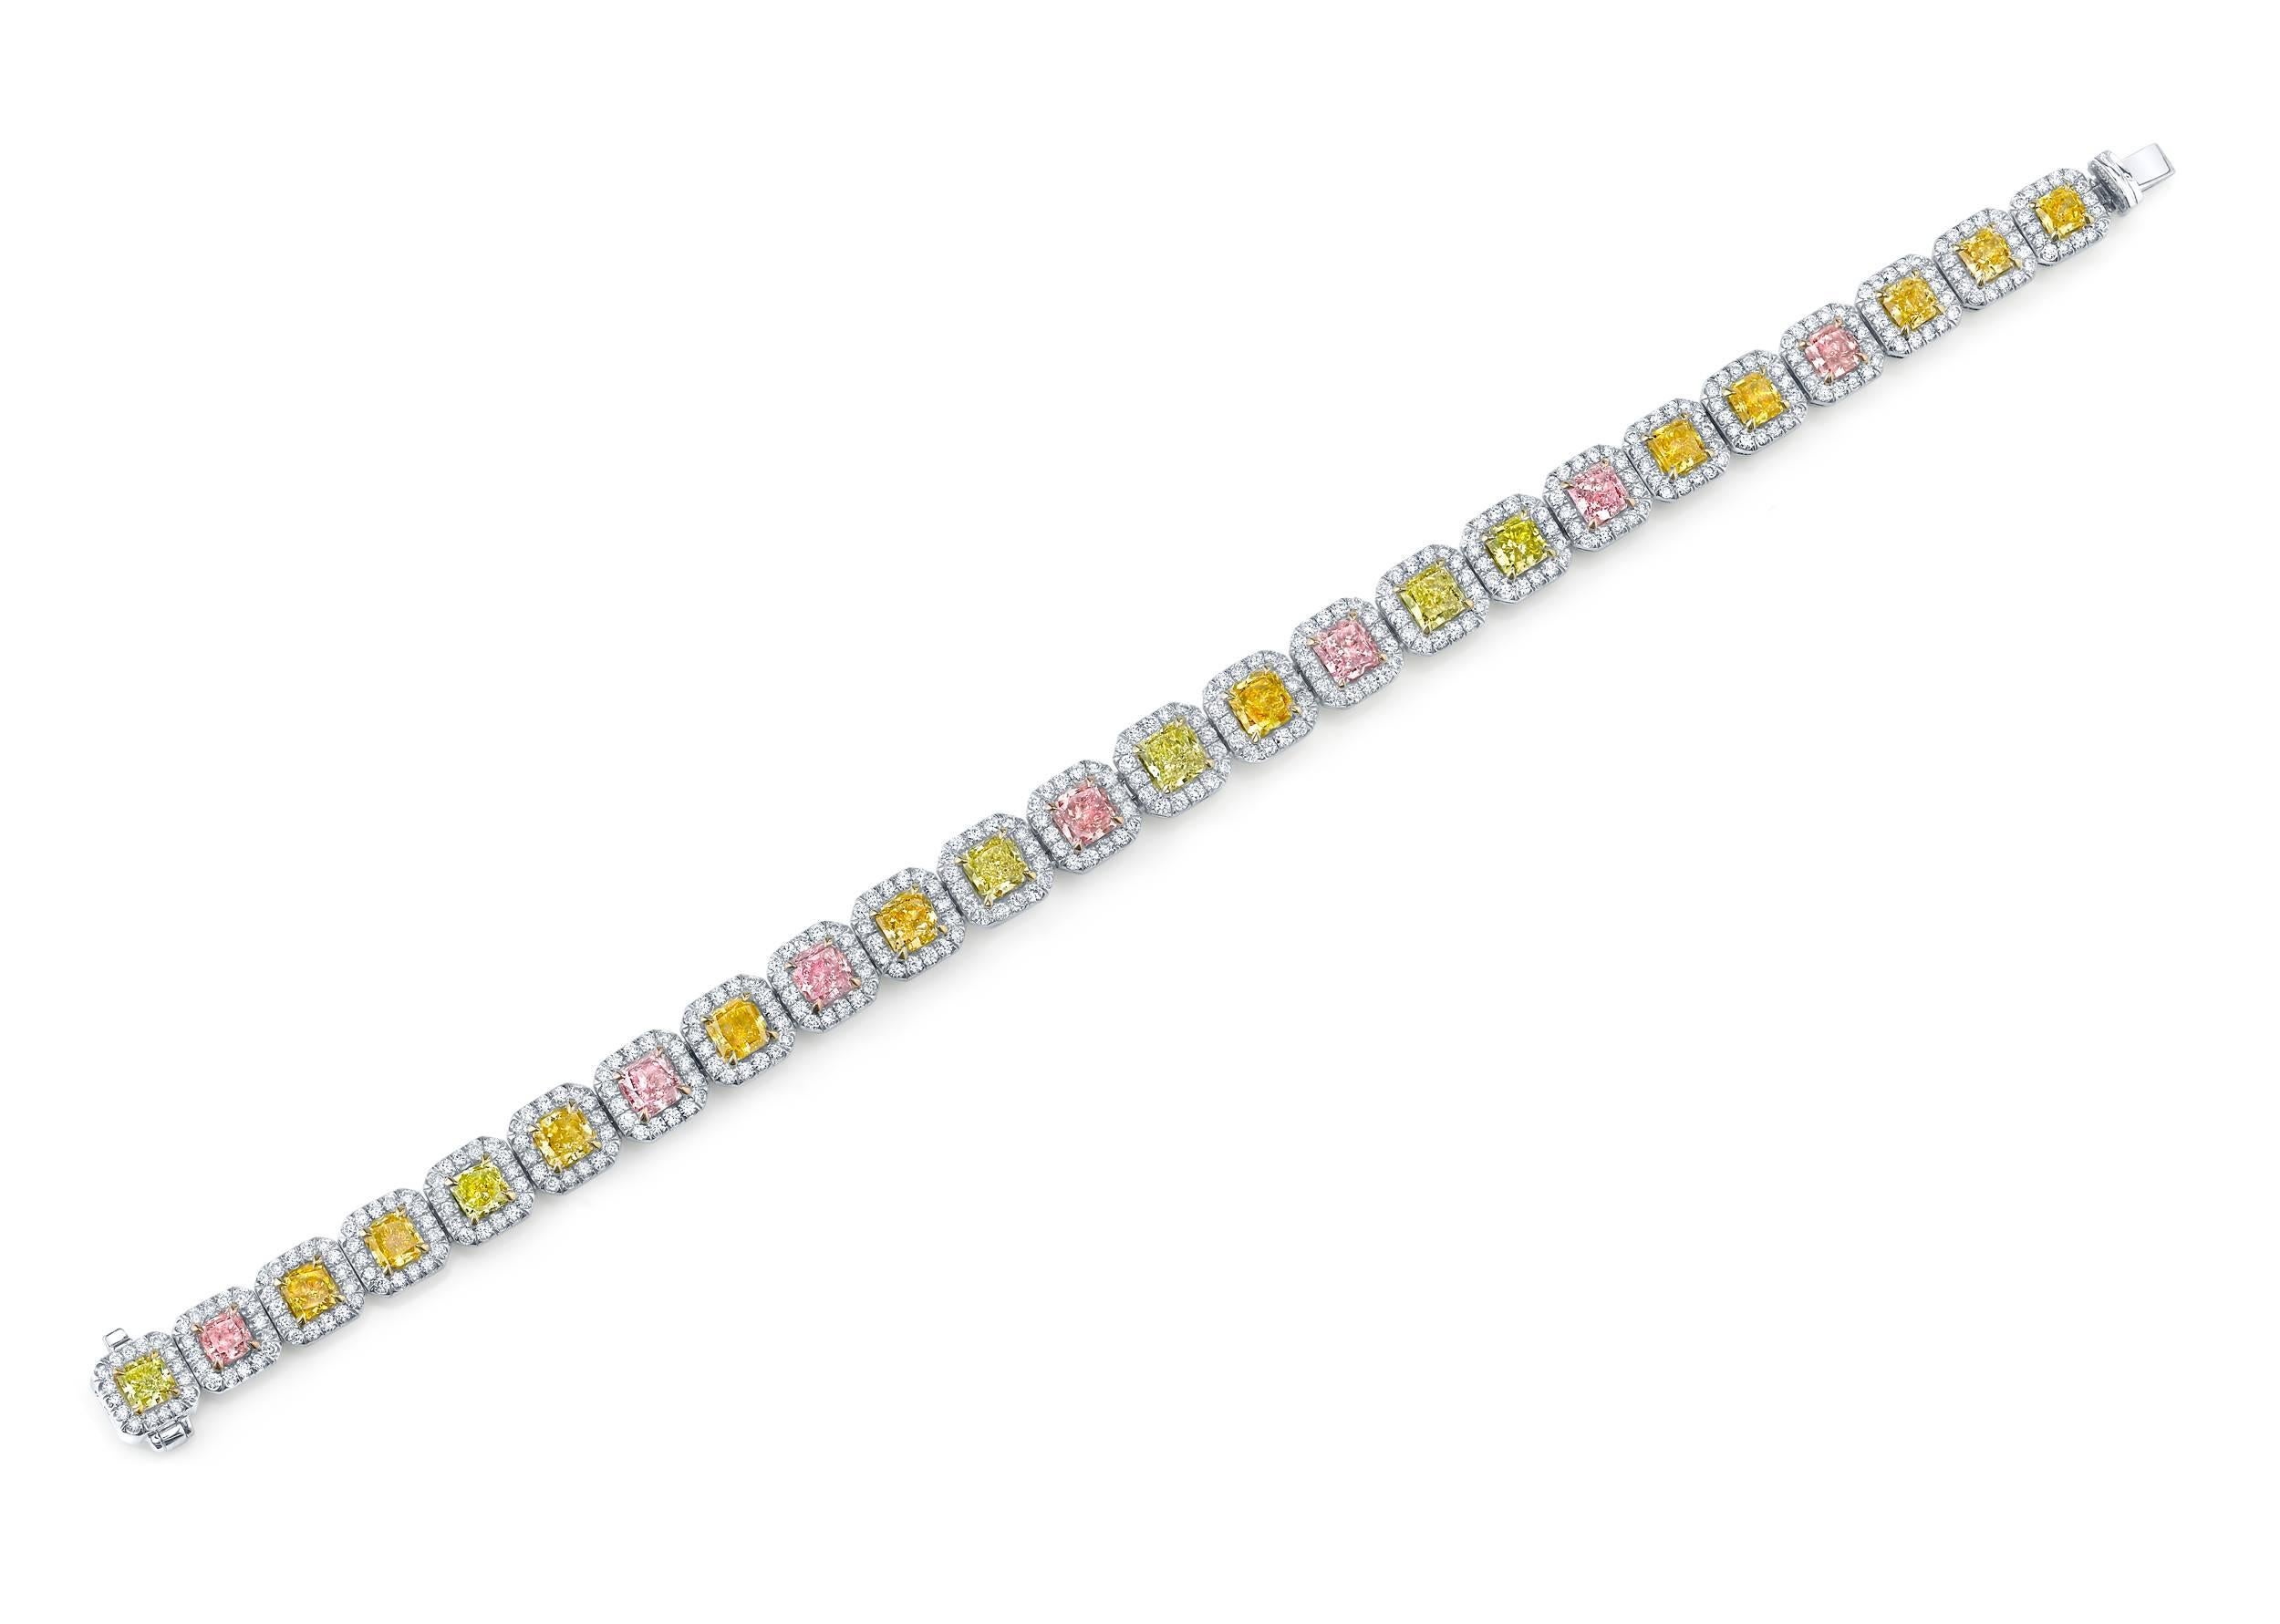 Platinum Bracelet with 24 Mixed Fancy Color Radiant Cut Diamonds weighing 9.34ct and 384 Round Brilliant Cut Diamonds weighing 3.39ct. The bracelet is 7 inches long and absolutely beautiful. 